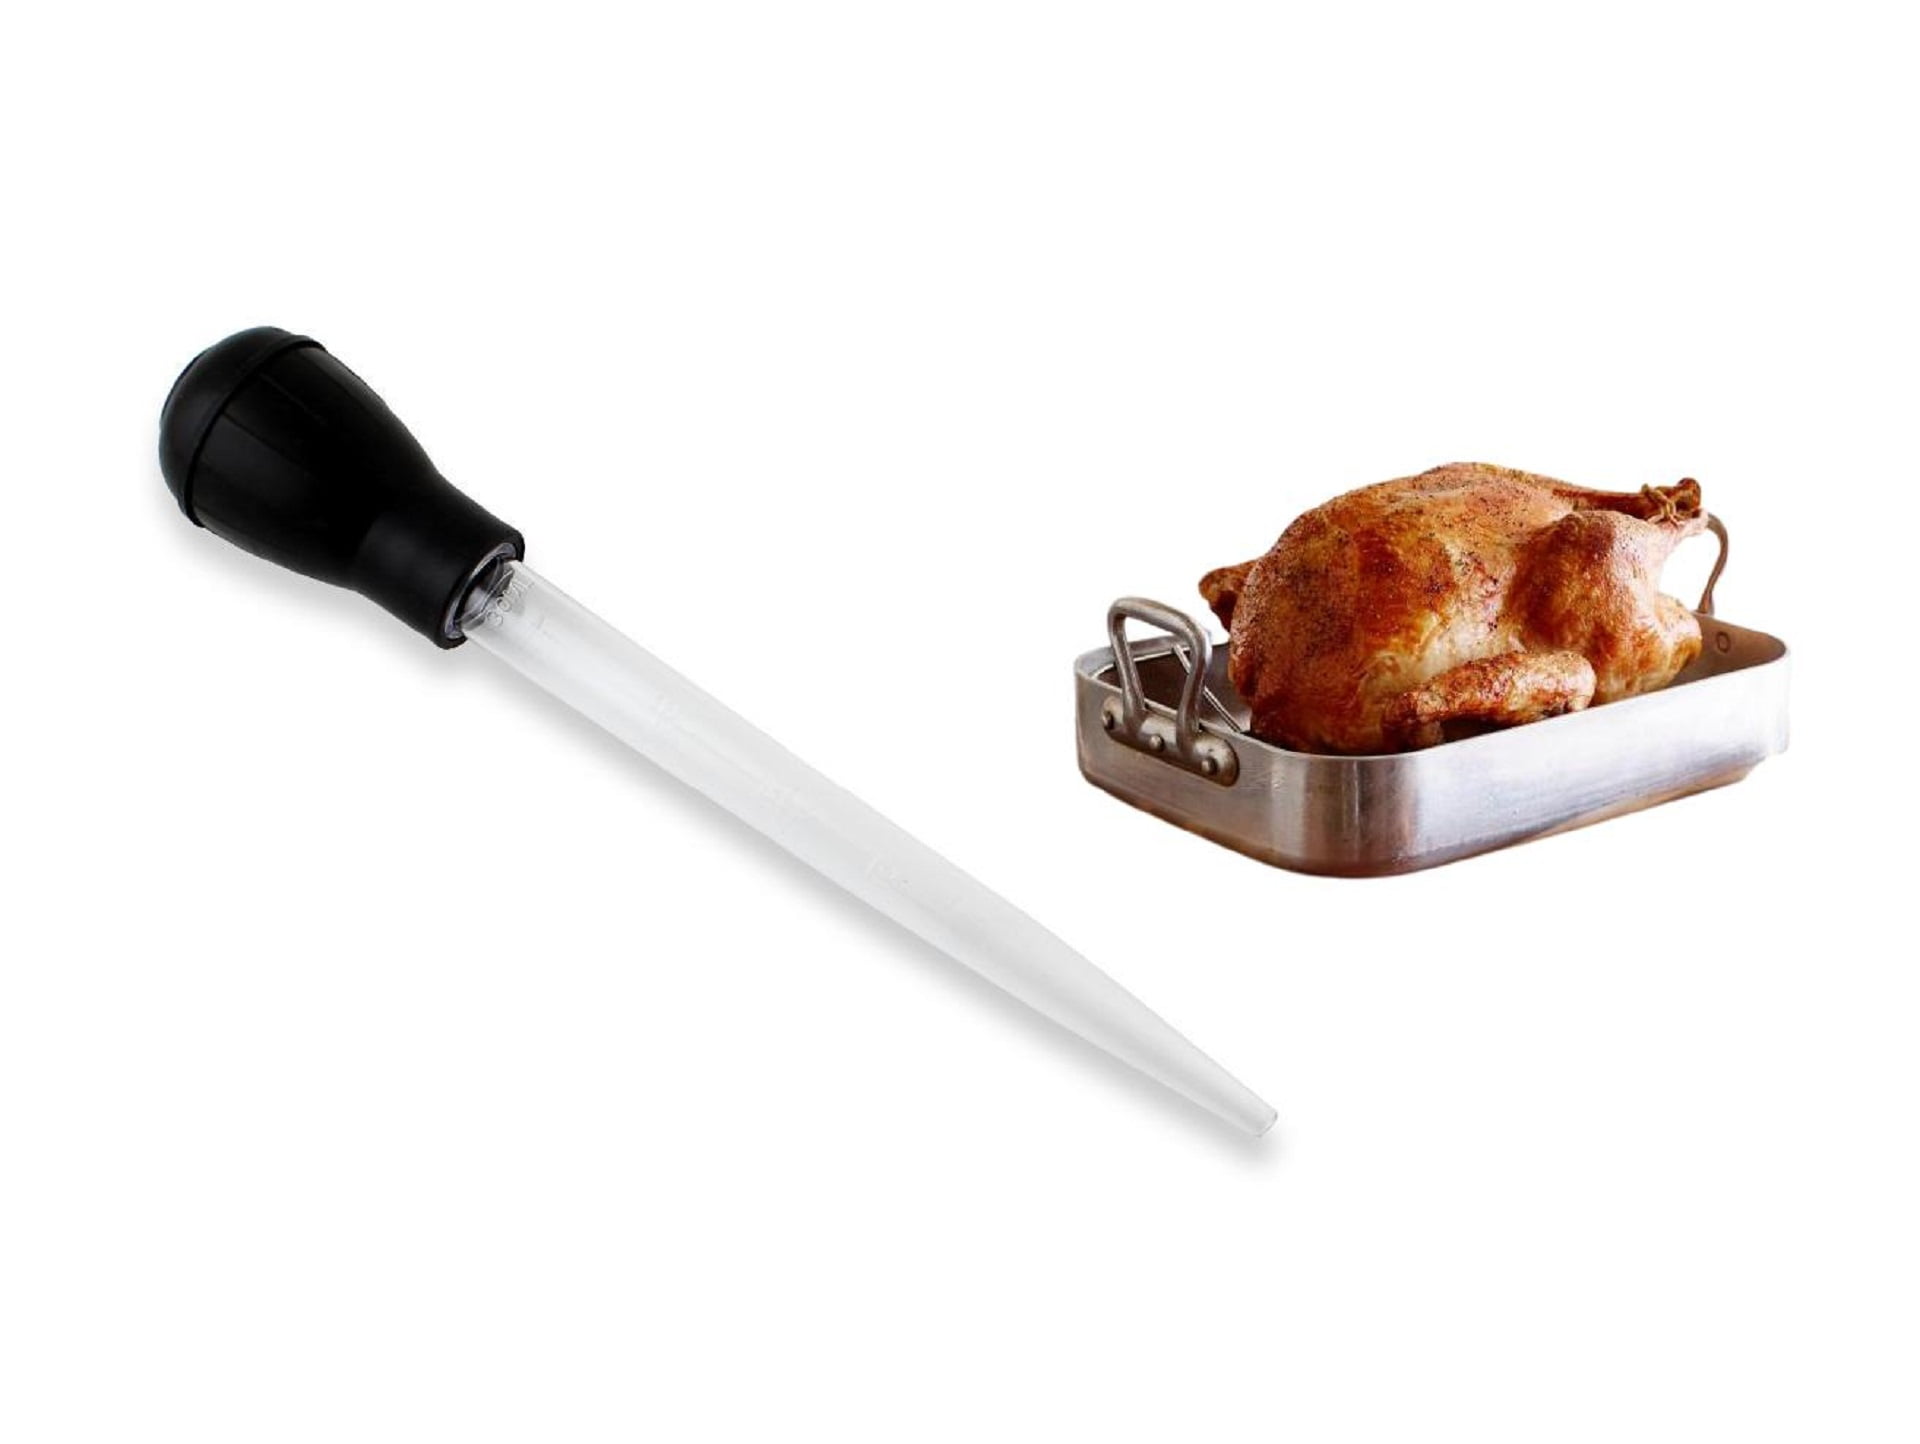 How to use a turkey baster for different cooking methods